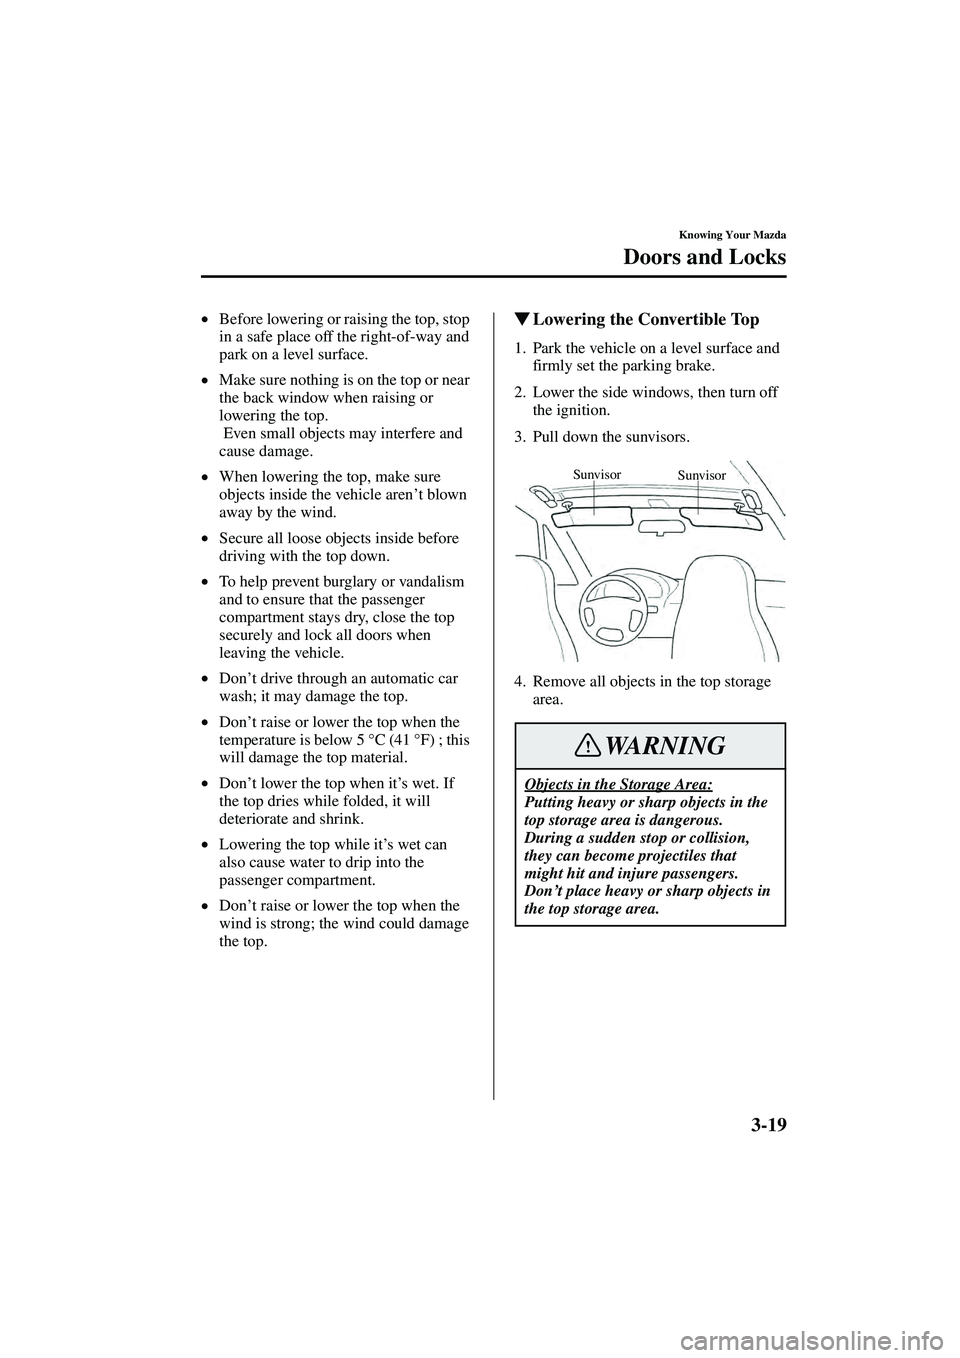 MAZDA MODEL MX-5 MIATA 2004  Owners Manual 3-19
Knowing Your Mazda
Doors and Locks
Form No. 8S15-EA-03G
•Before lowering or raising the top, stop 
in a safe place off the right-of-way and 
park on a level surface.
• Make sure nothing is on